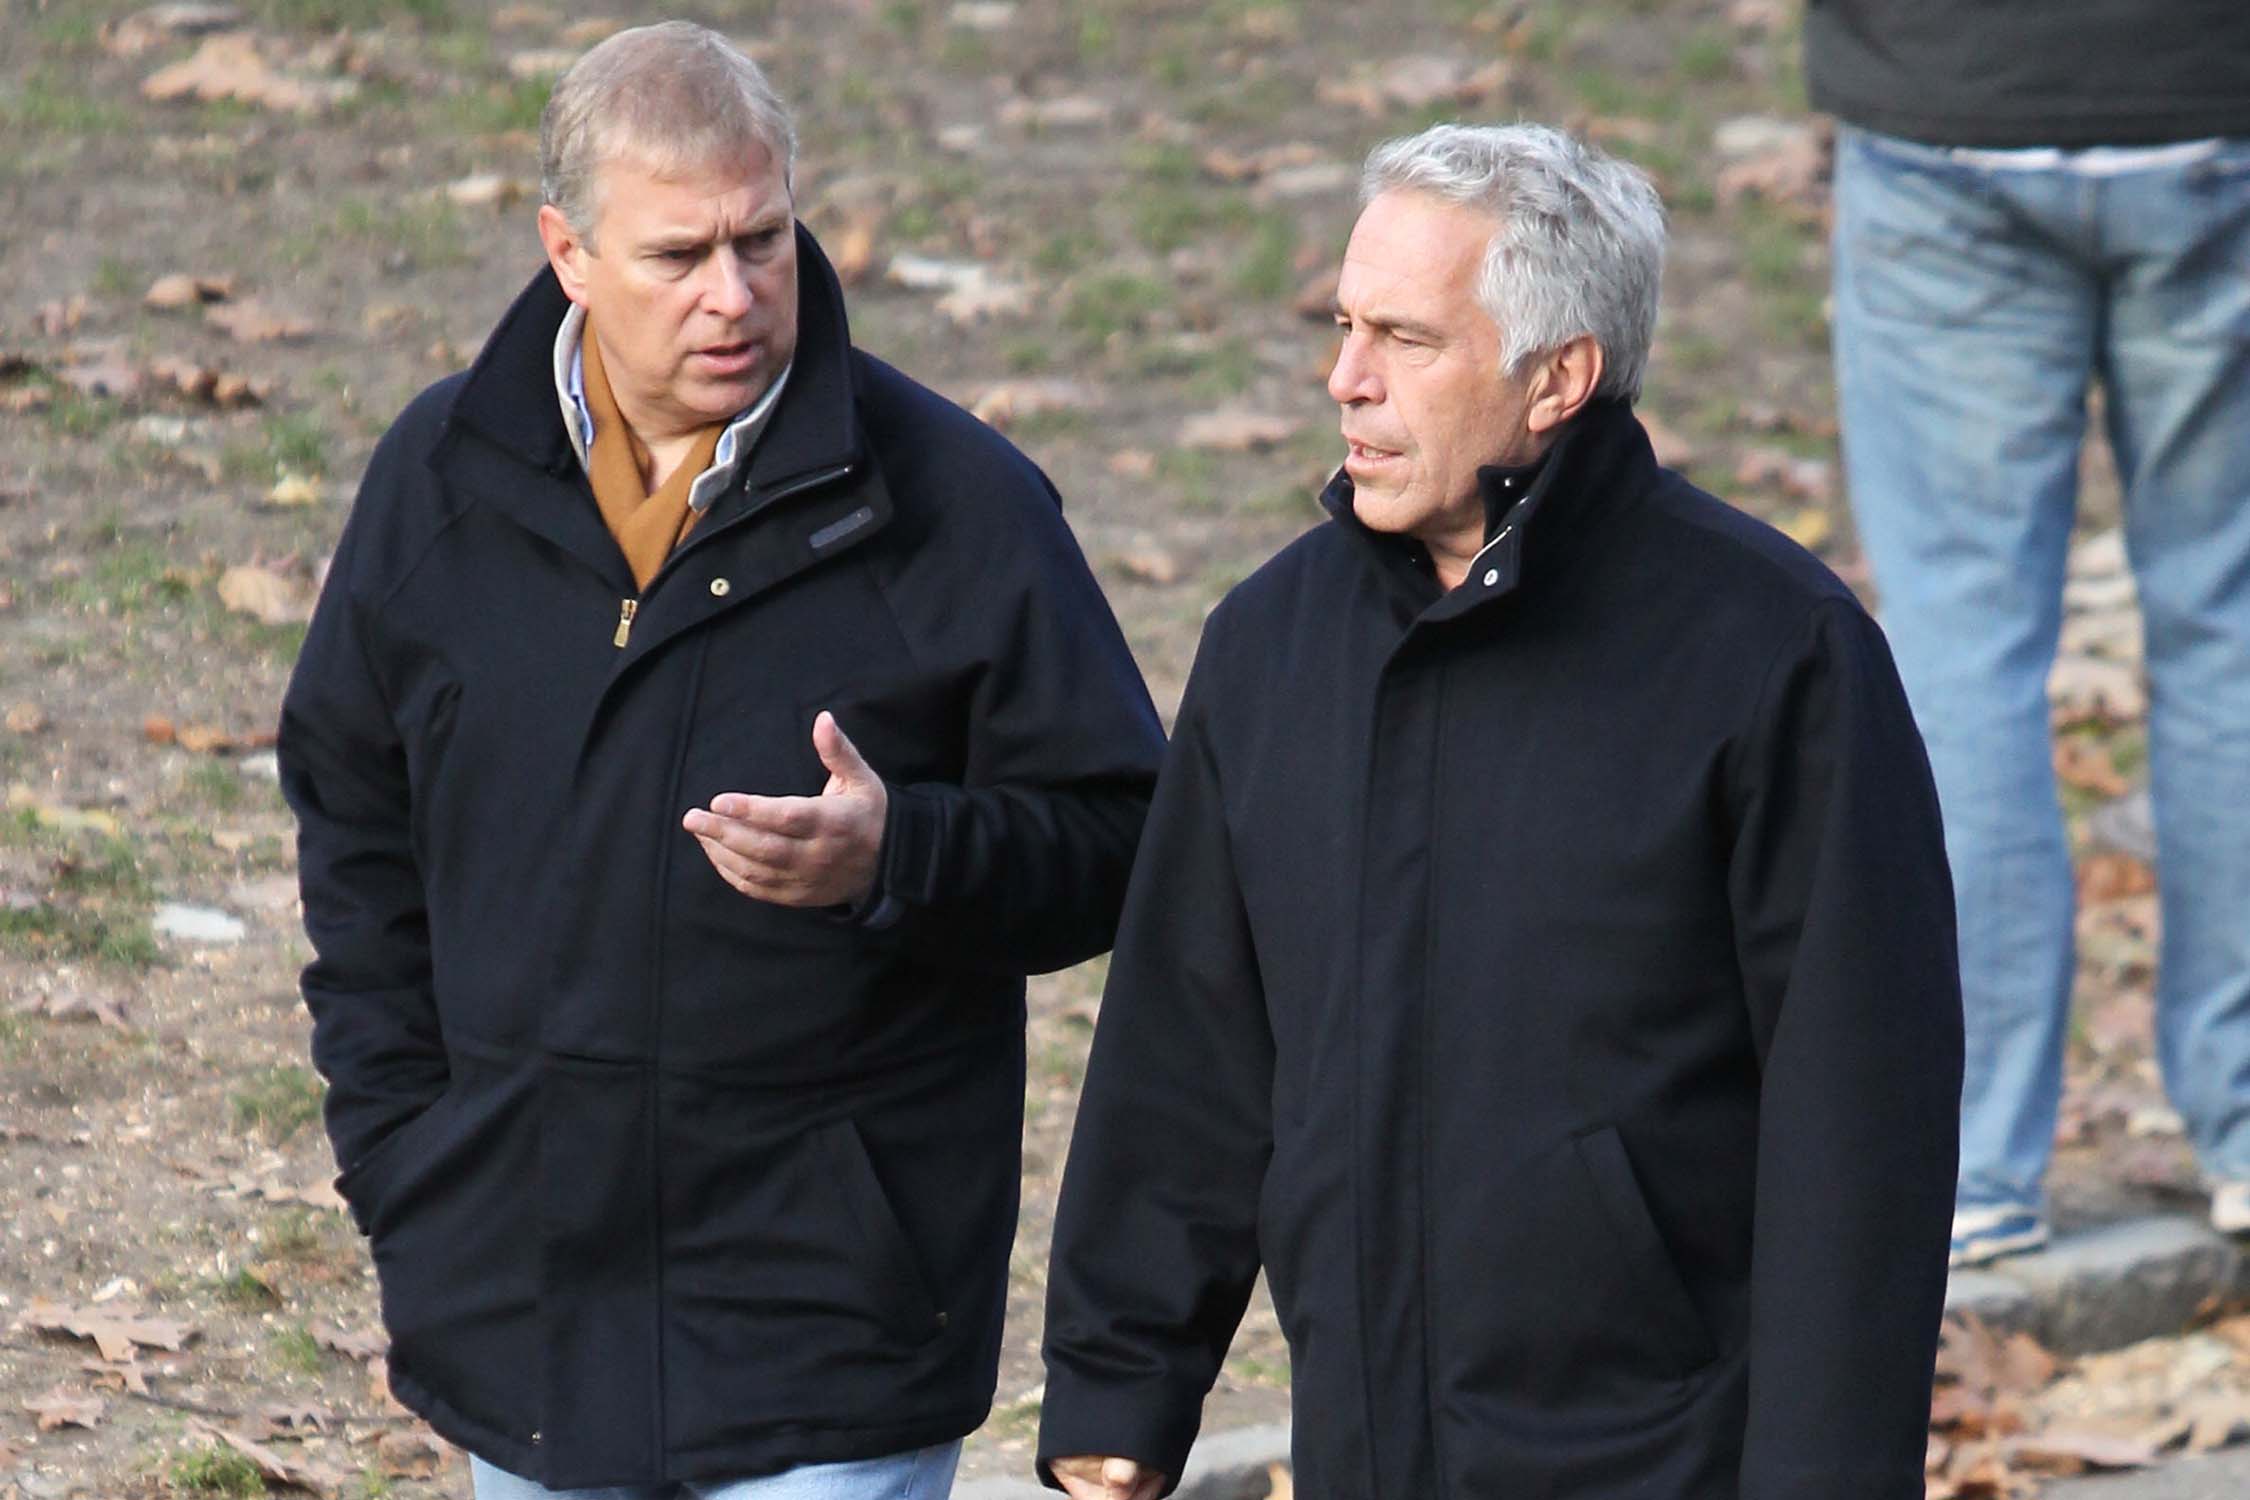 Andrew and Epstein walking through New York's Central Park